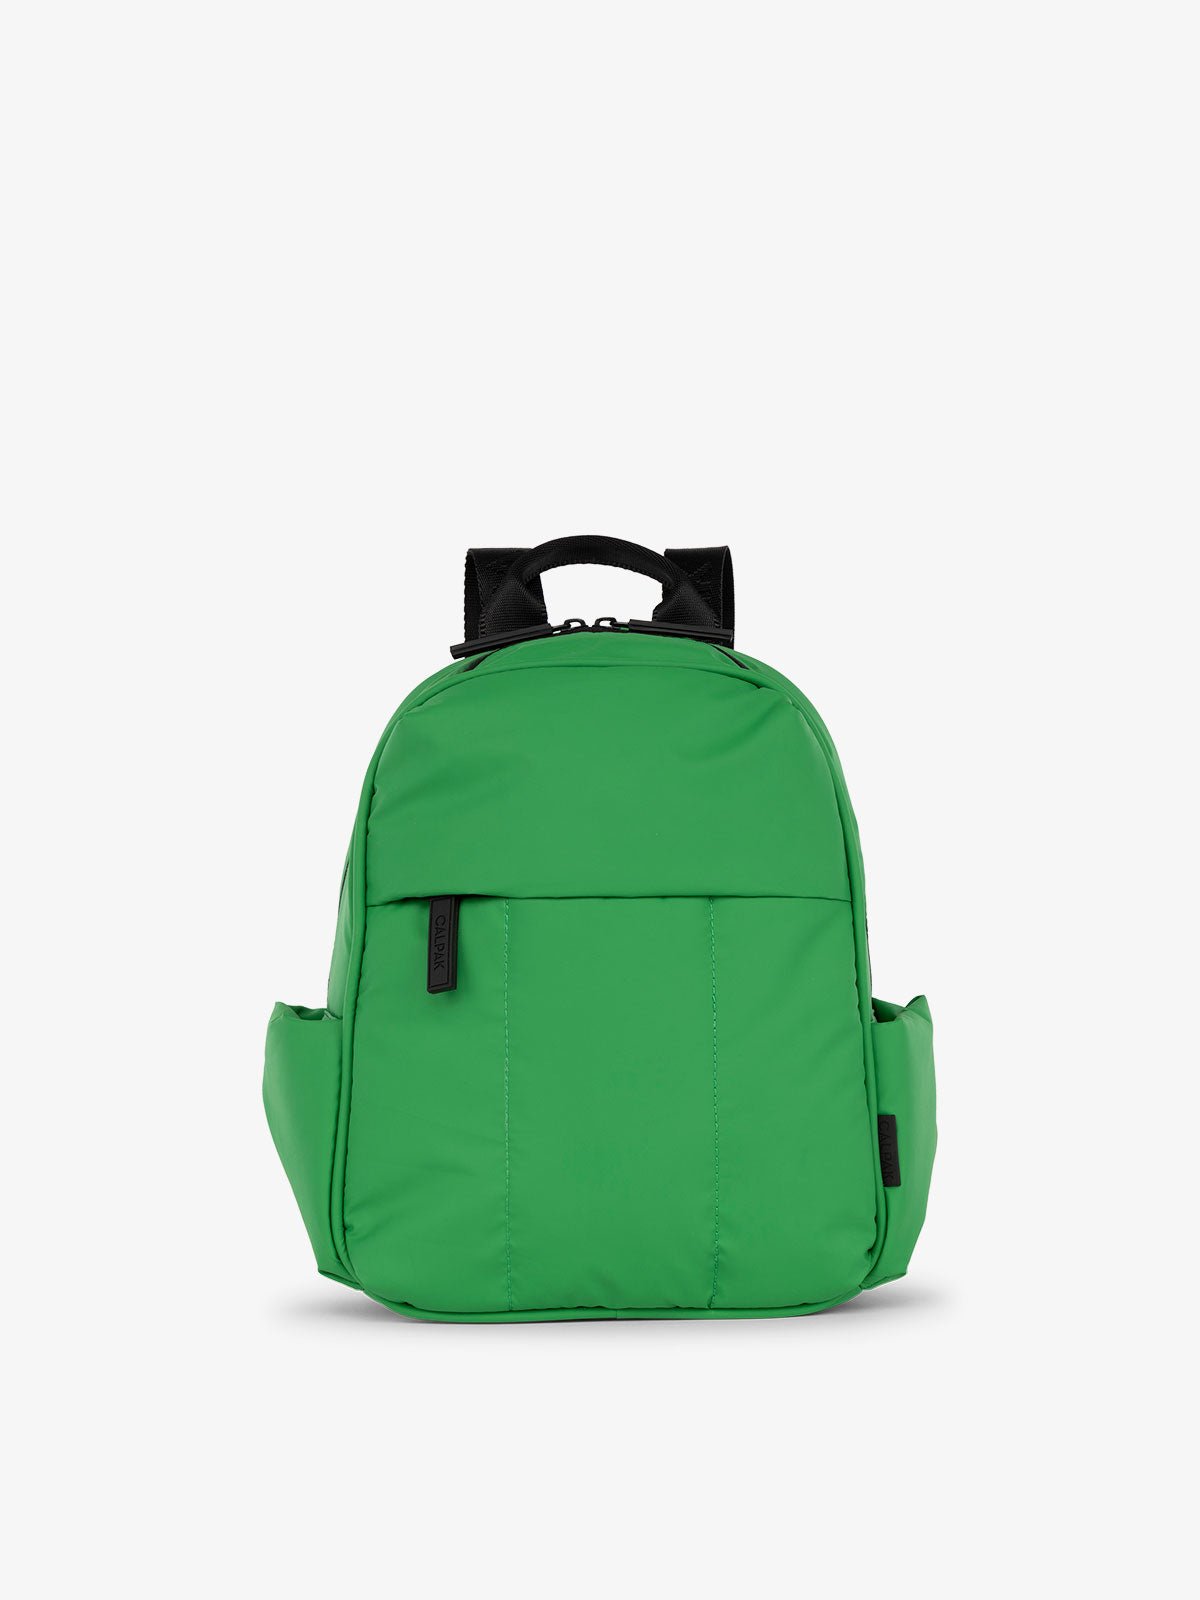 CALPAK Luka Mini Backpack with soft puffy exterior and front zippered pocket in green apple